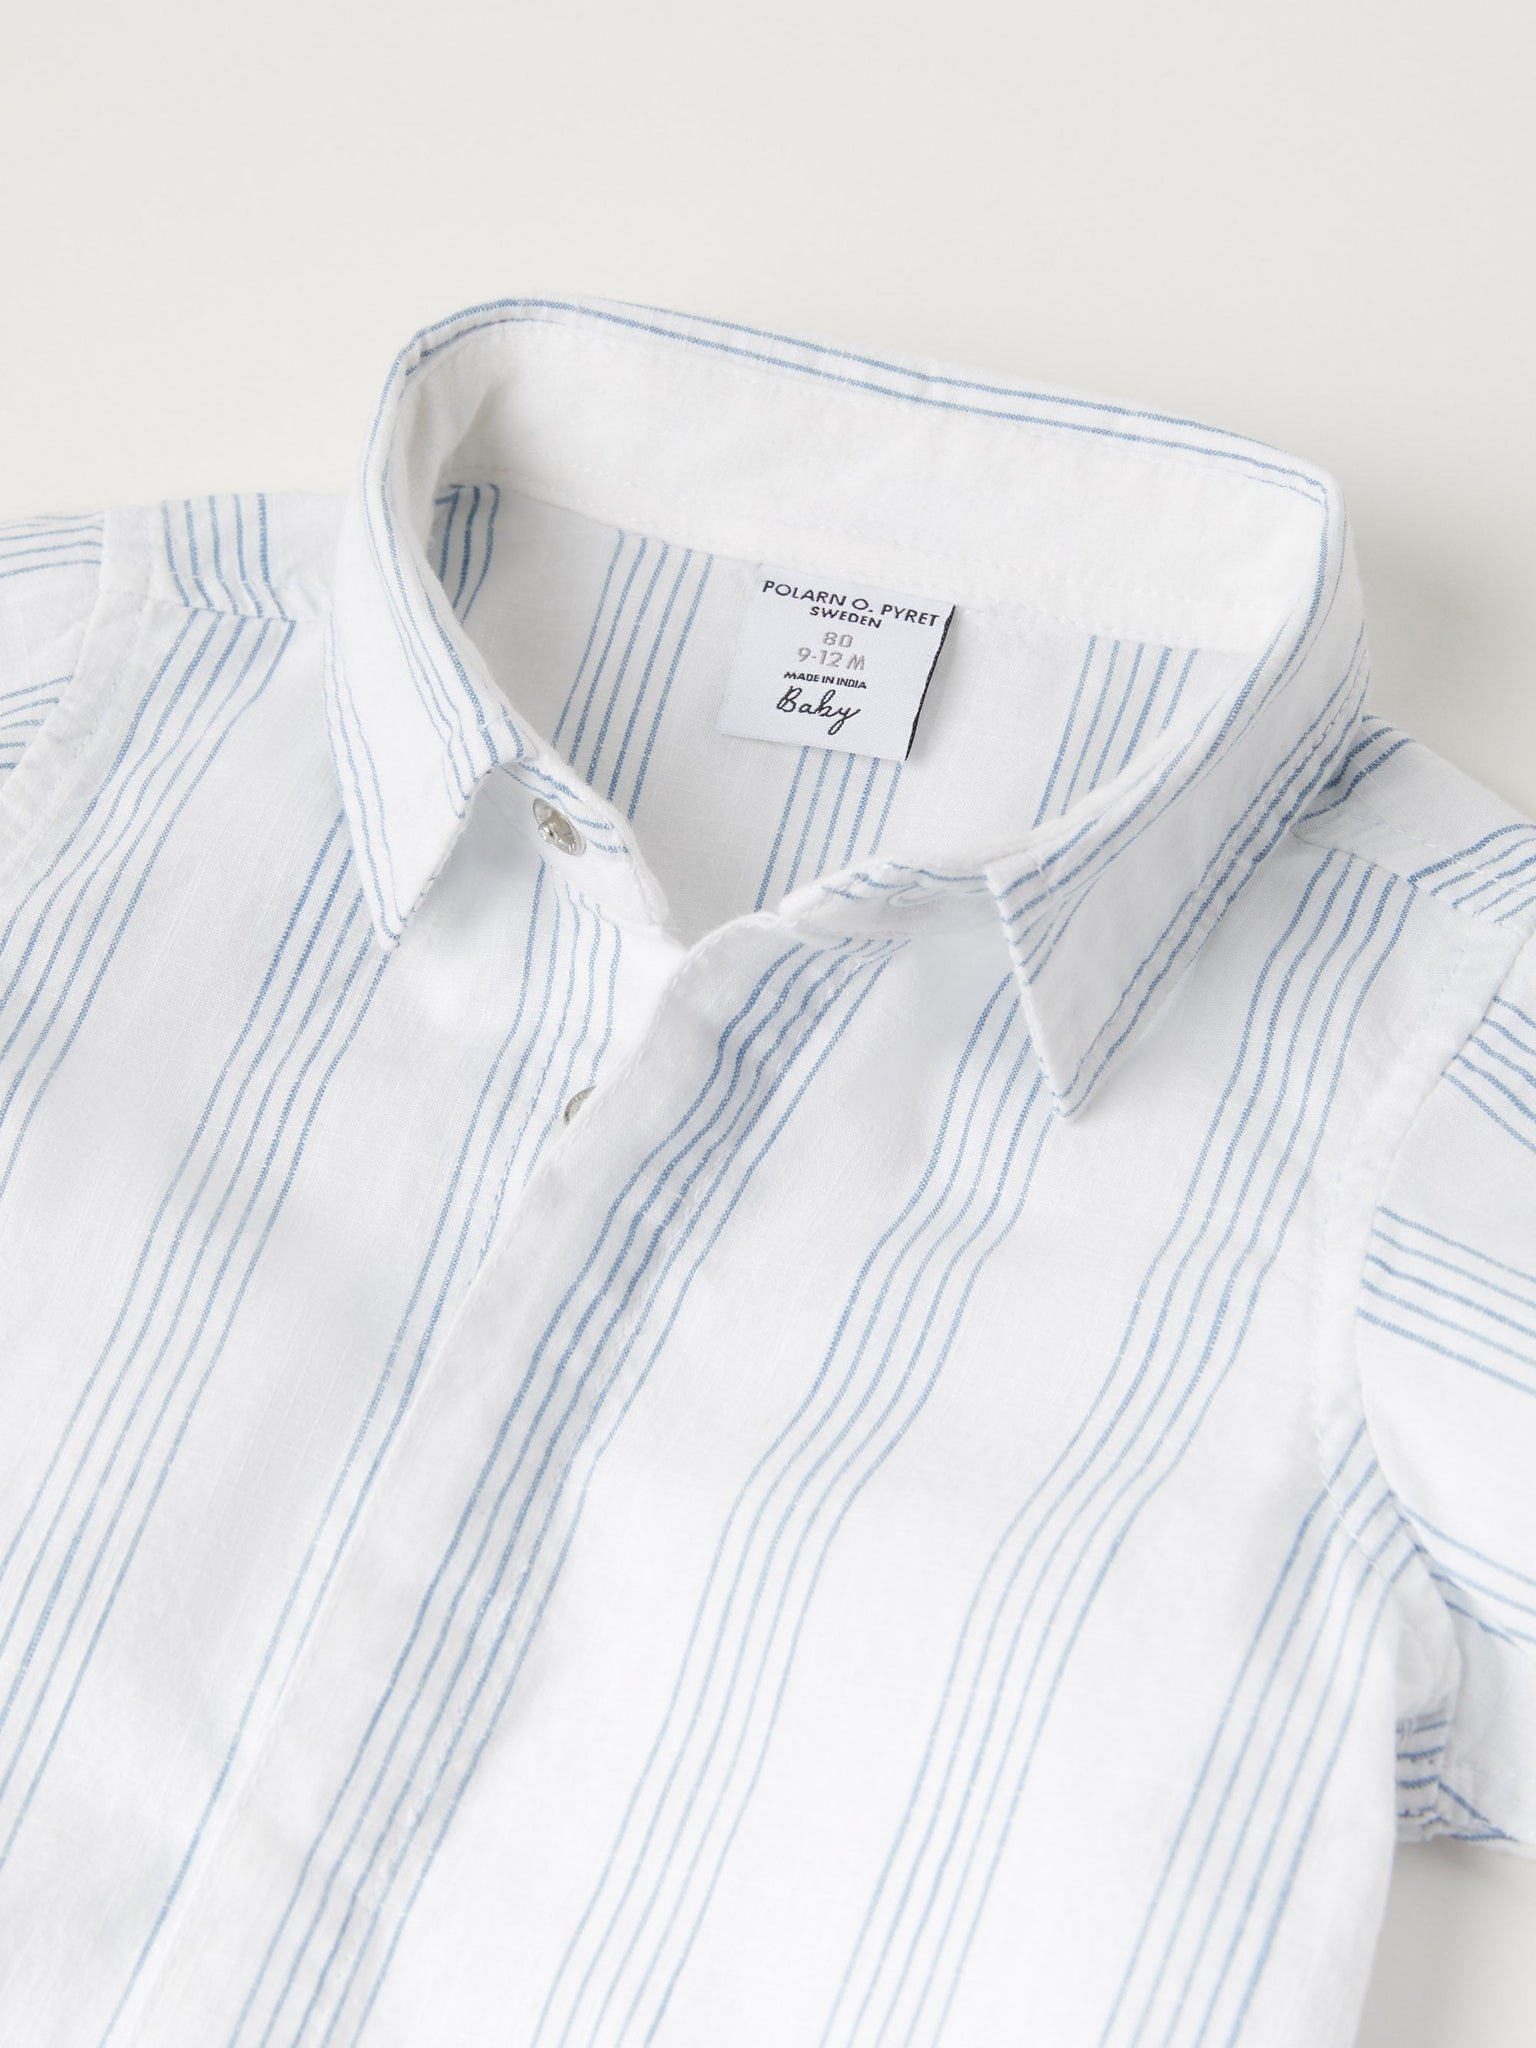 Organic Cotton Striped Baby Shirt from the Polarn O. Pyret baby collection. Nordic kids clothes made from sustainable sources.